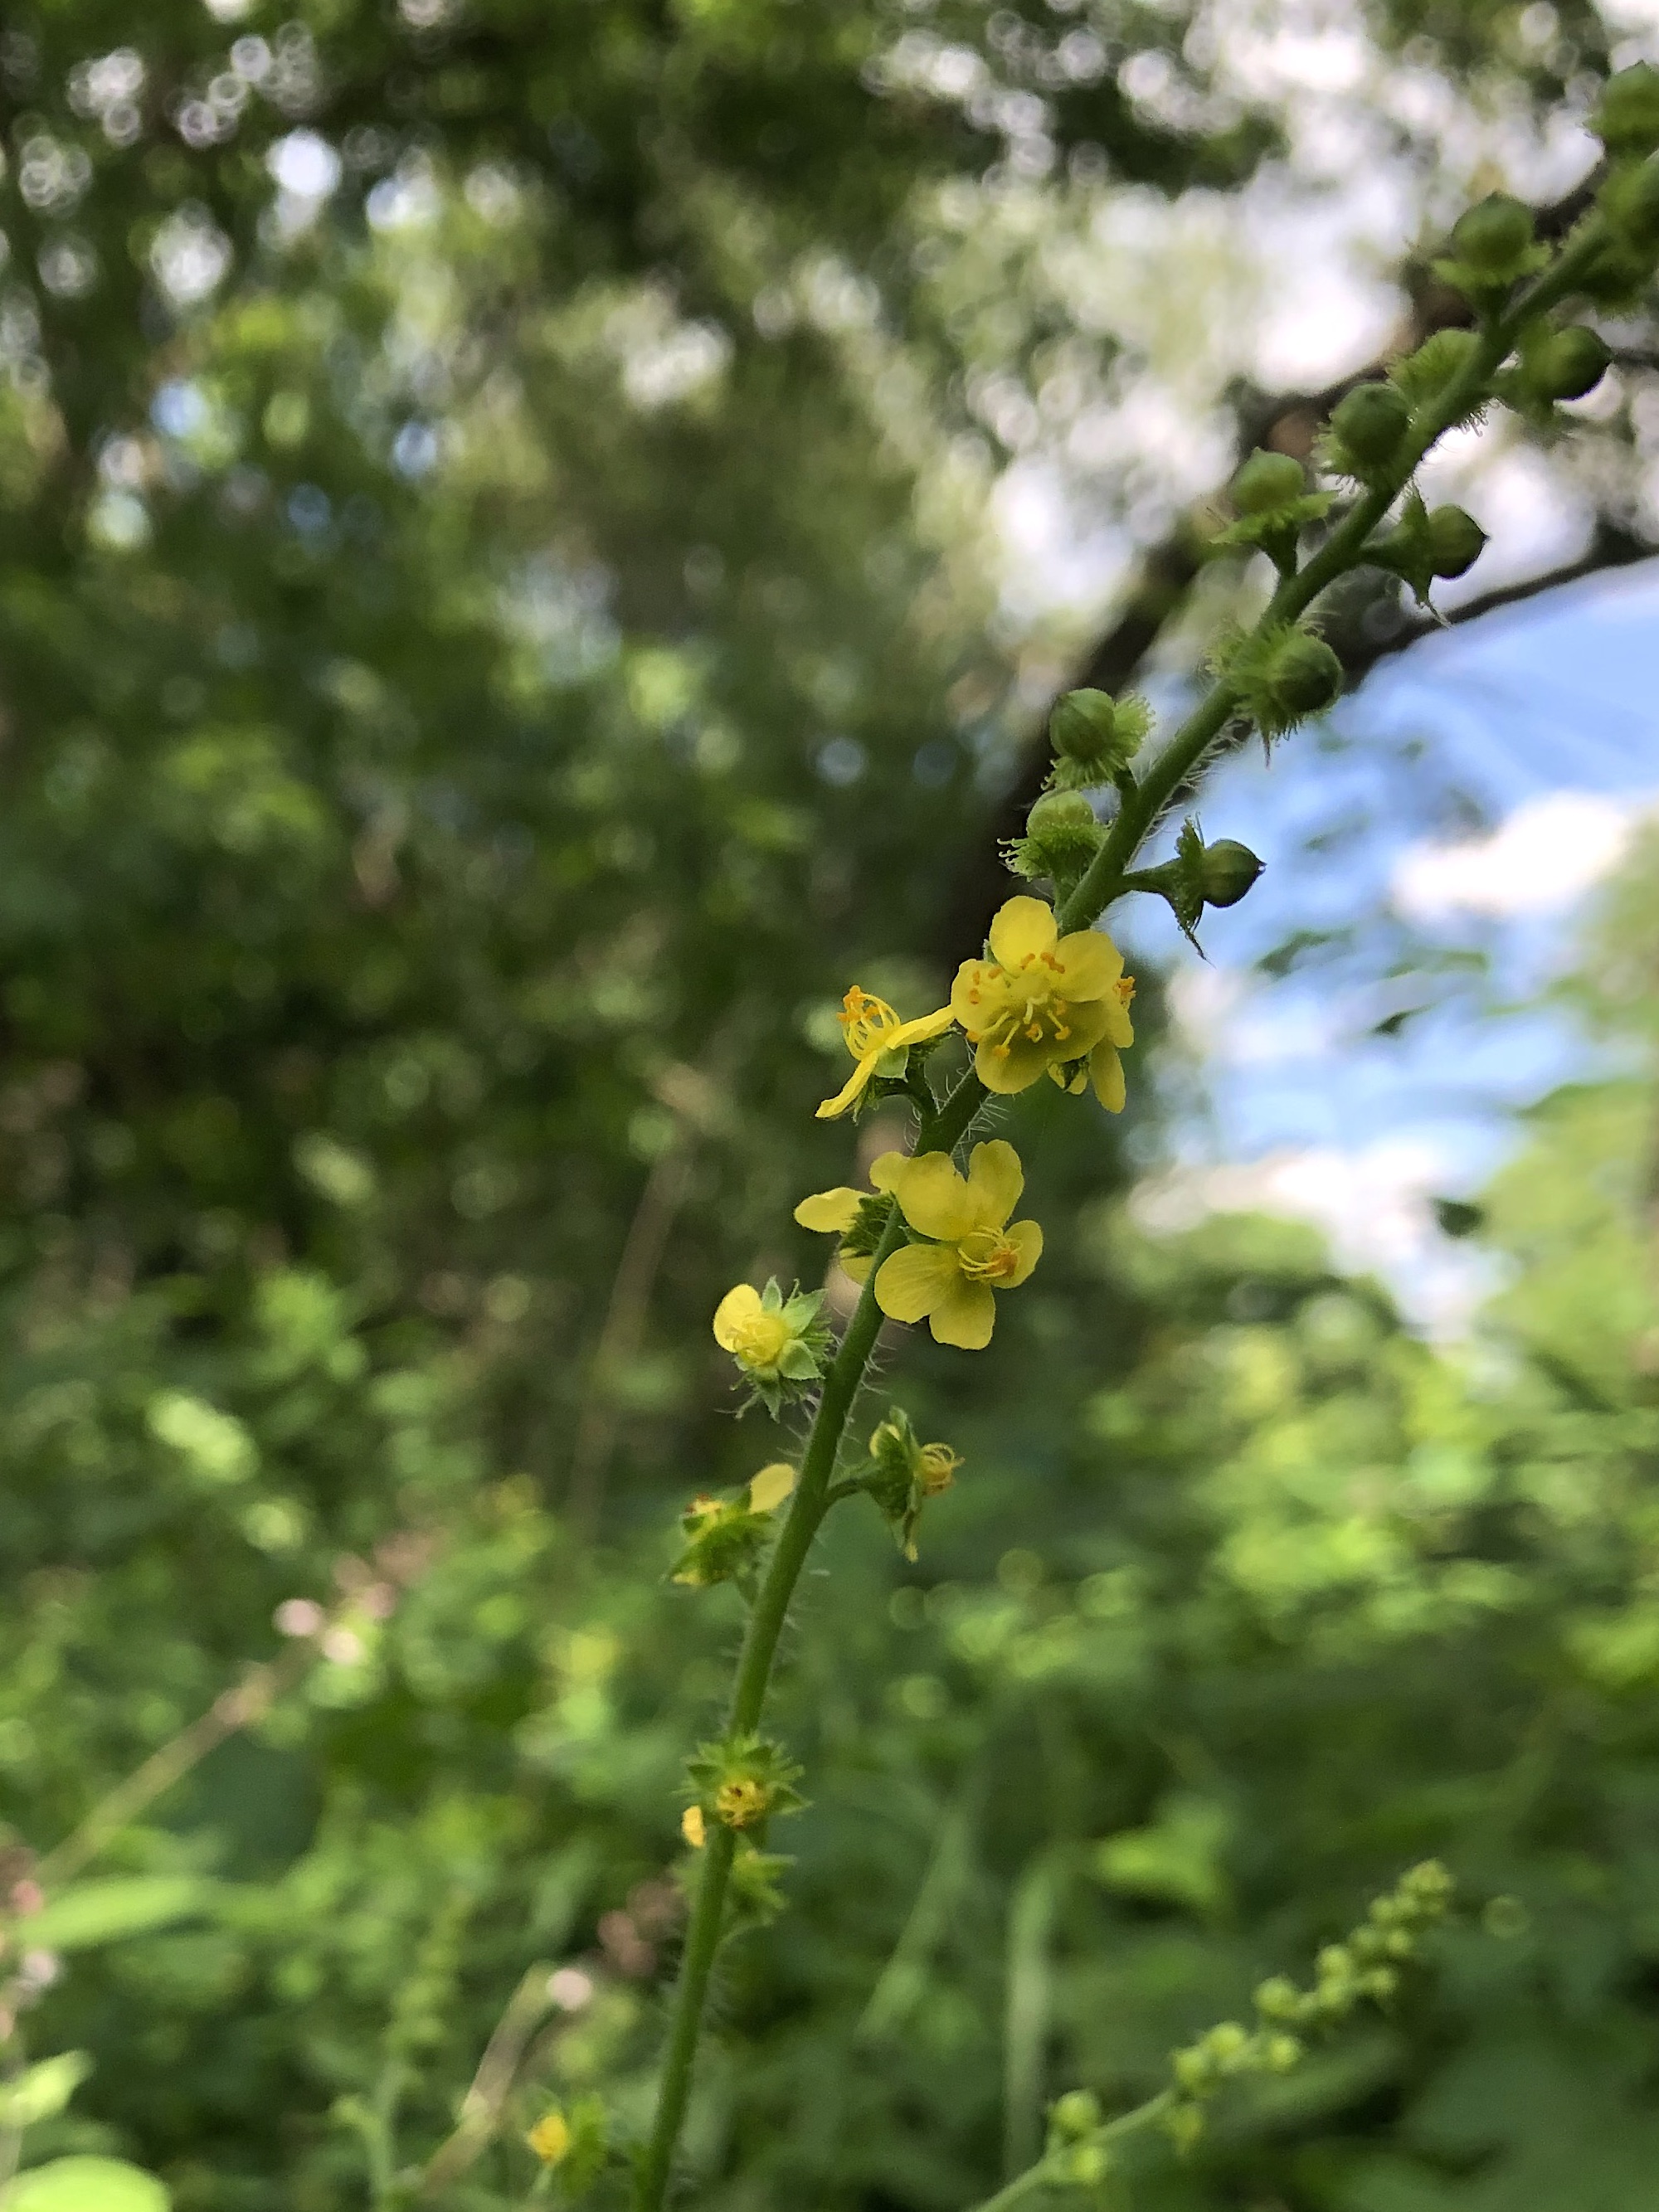 Tall Hairy Agrimony at edge of Nakoma Park natural area in Madison, Wisconsin on July 9, 2022.